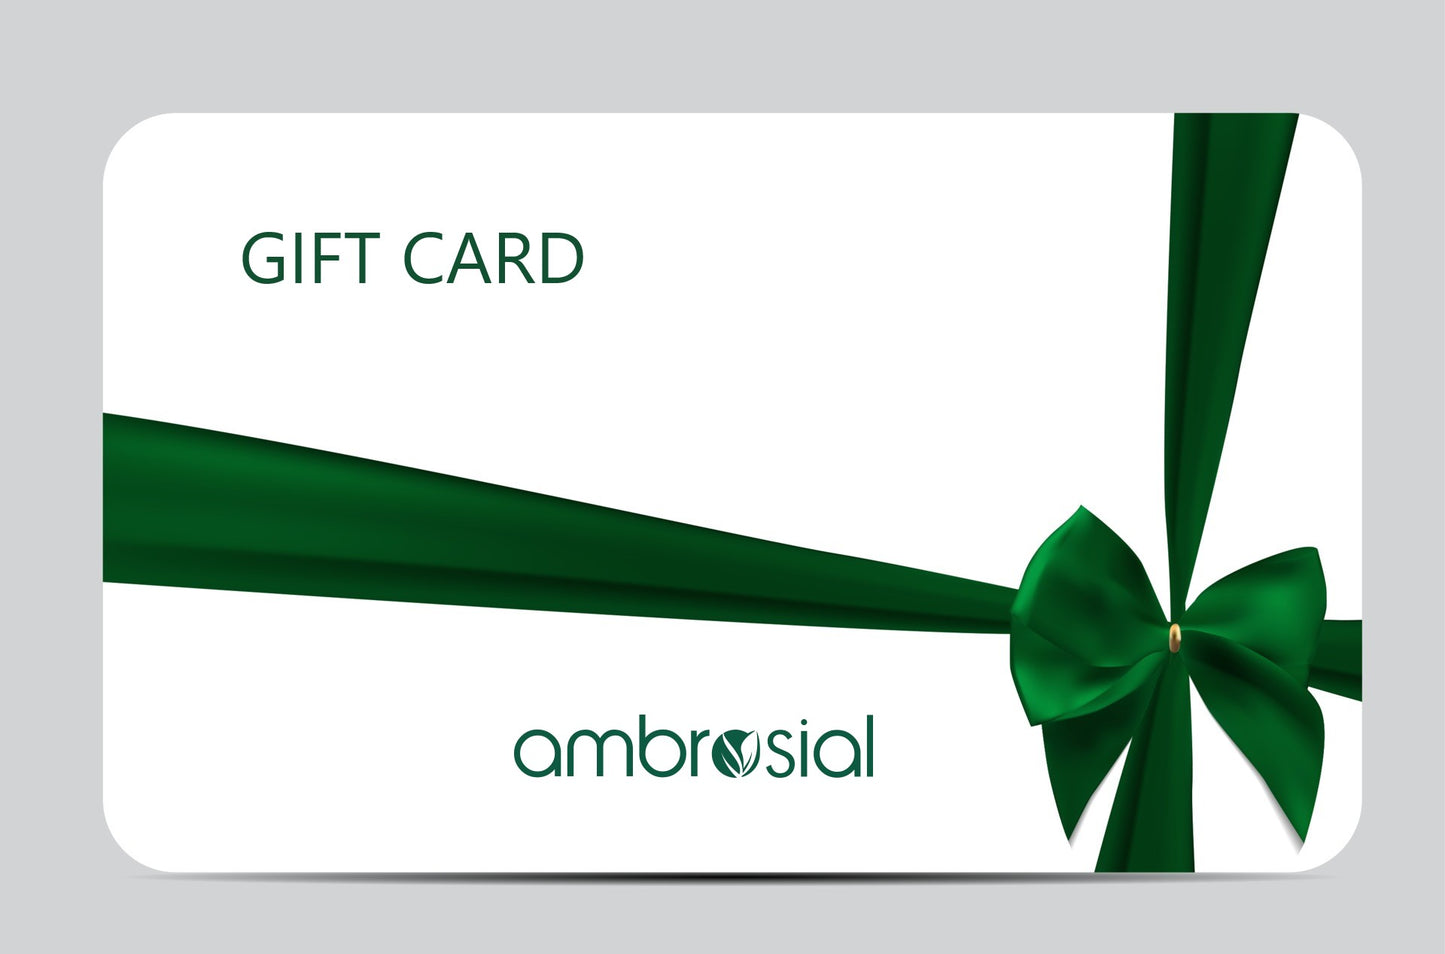 Ambrosial Gift Card